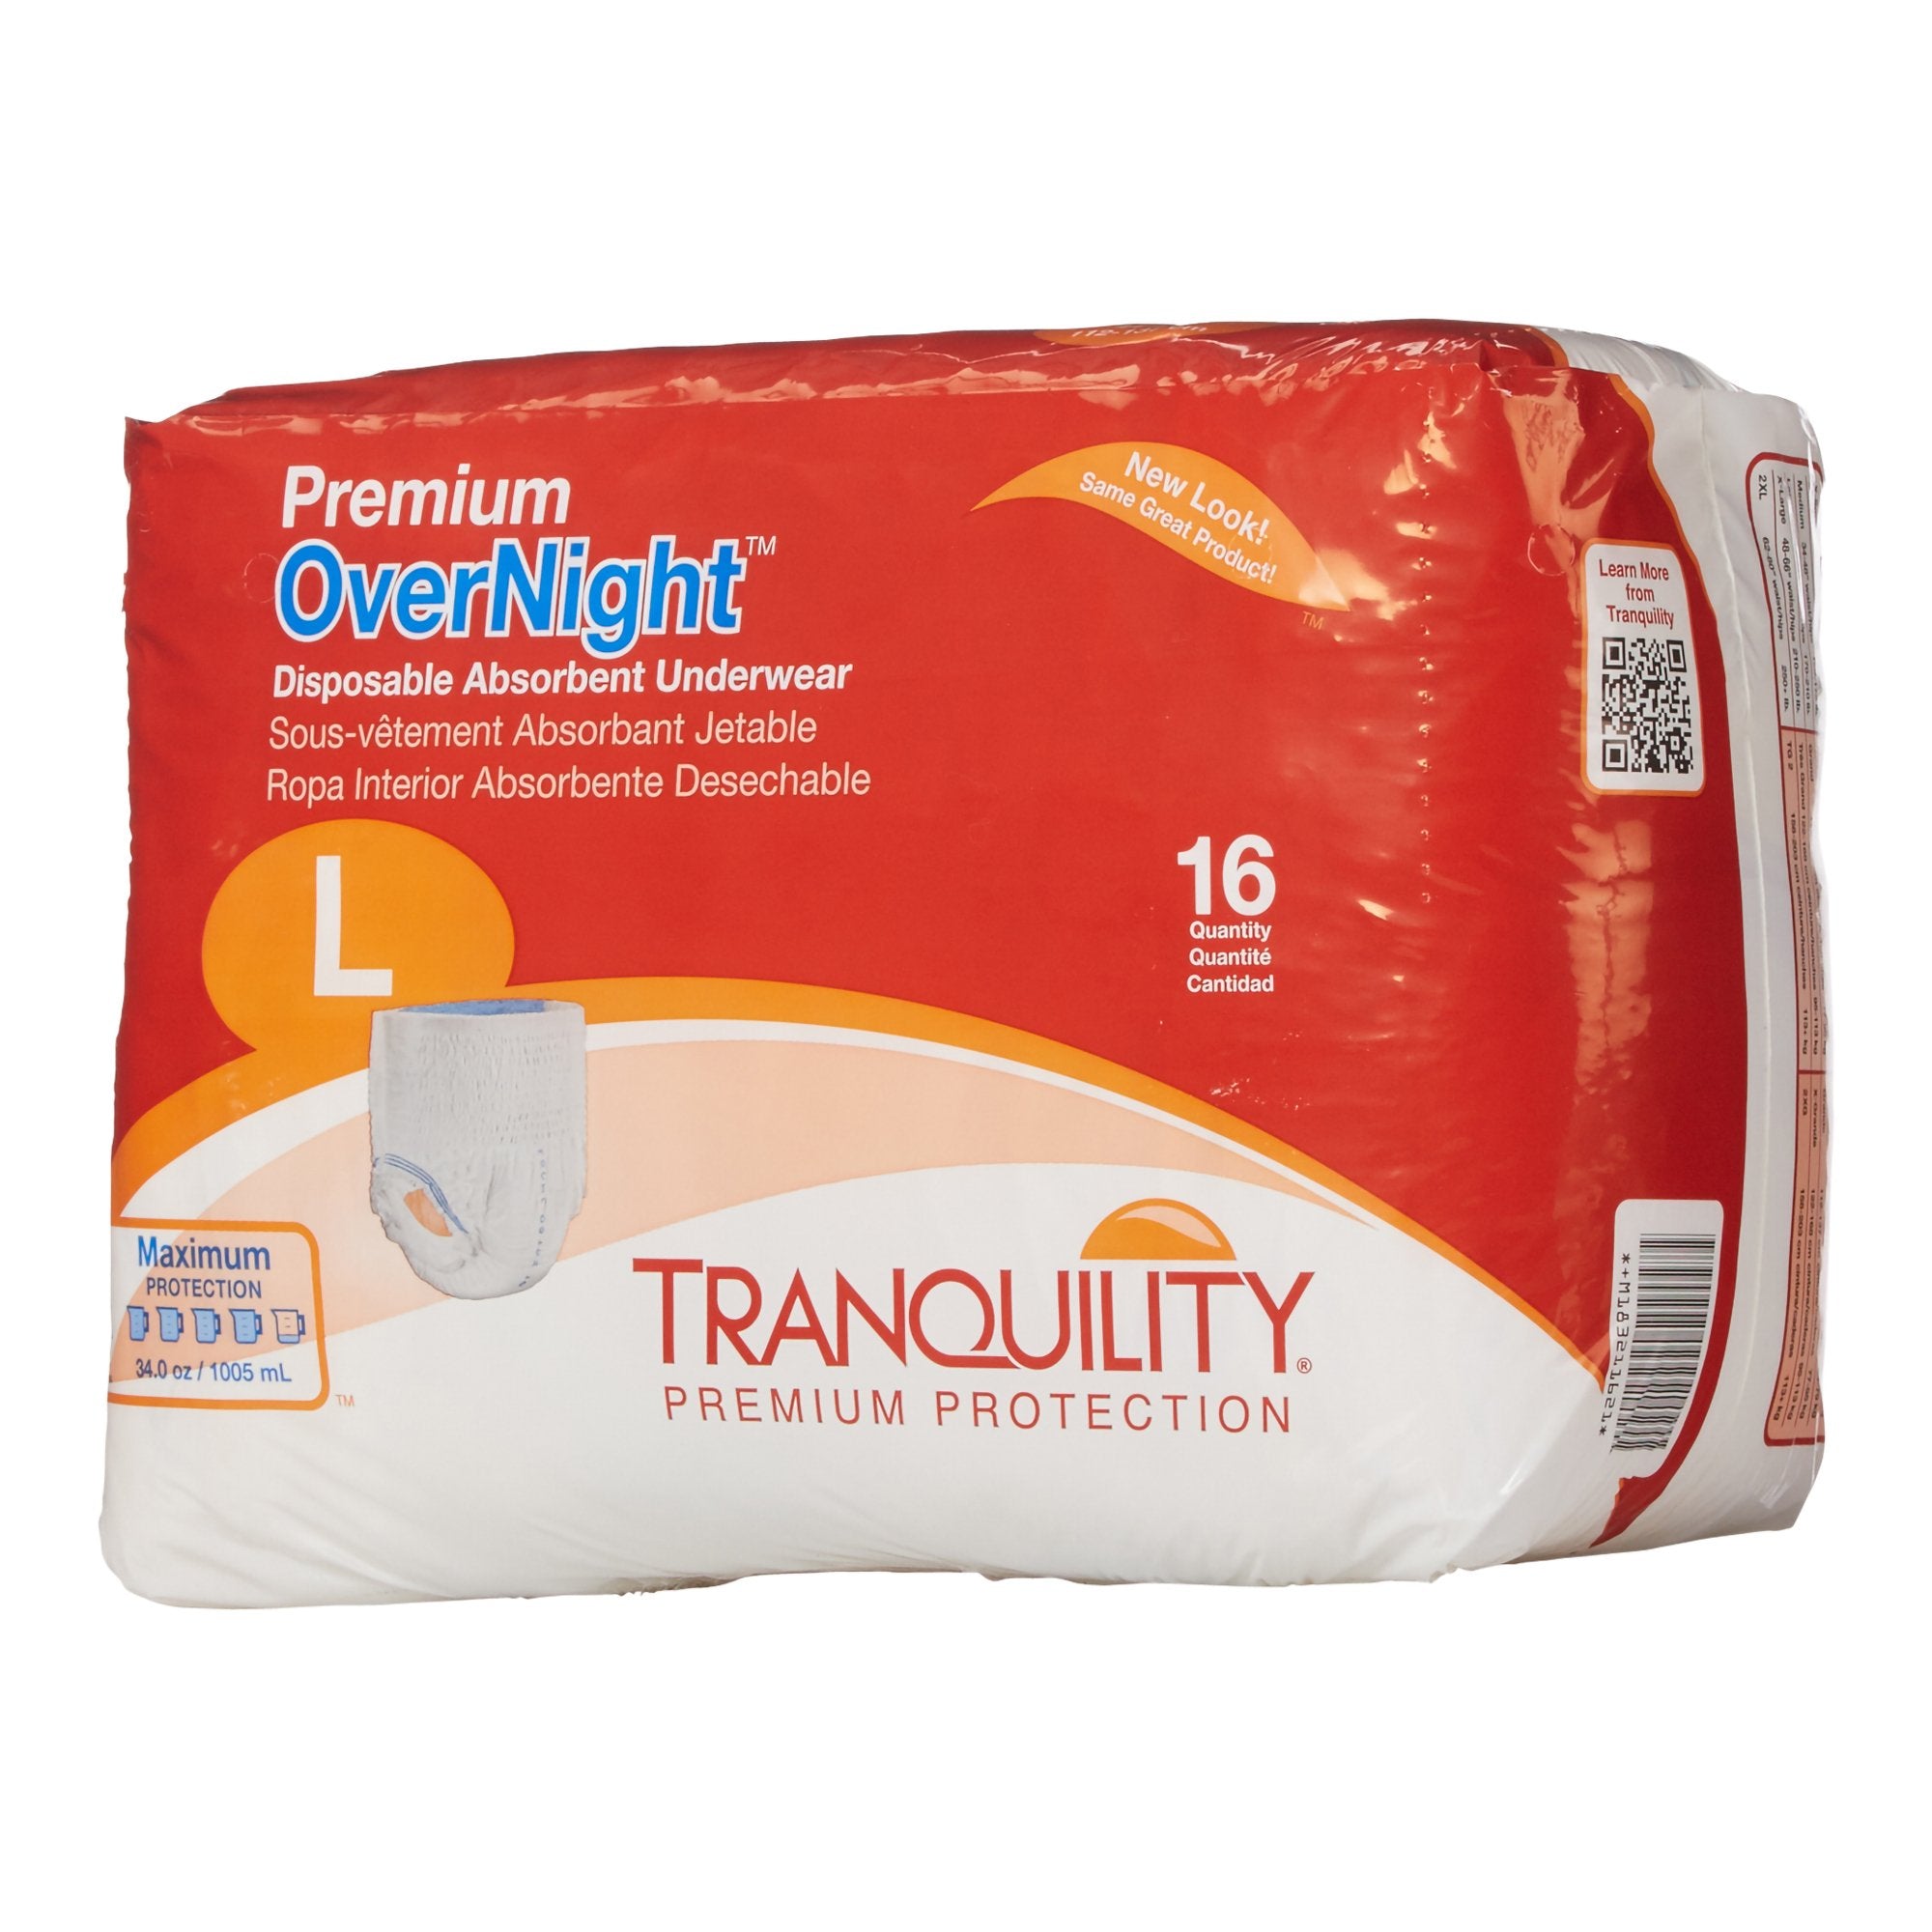 Unisex Adult Absorbent Underwear Tranquility® Premium OverNight™ Pull On with Tear Away Seams Large Disposable Heavy Absorbency